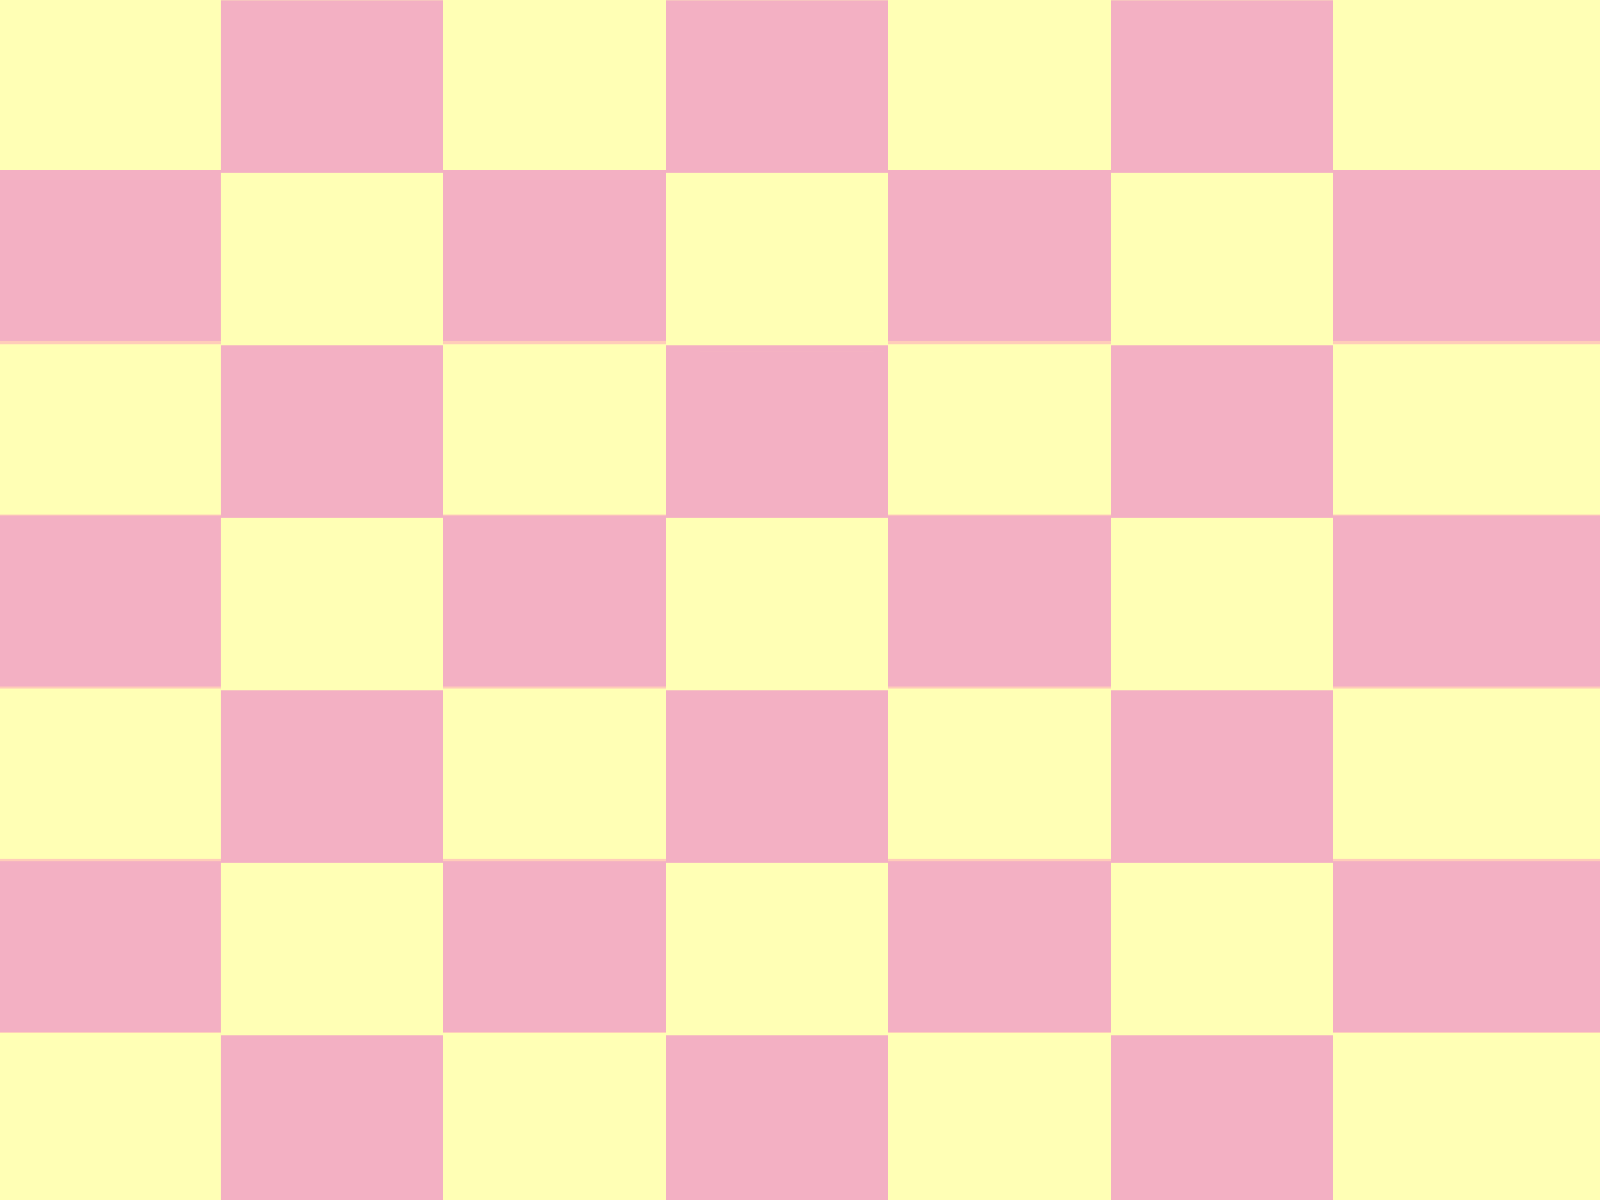 Those EYES aftereffects animation blink blinking eye eyes gif pastel colors pink vector yellow